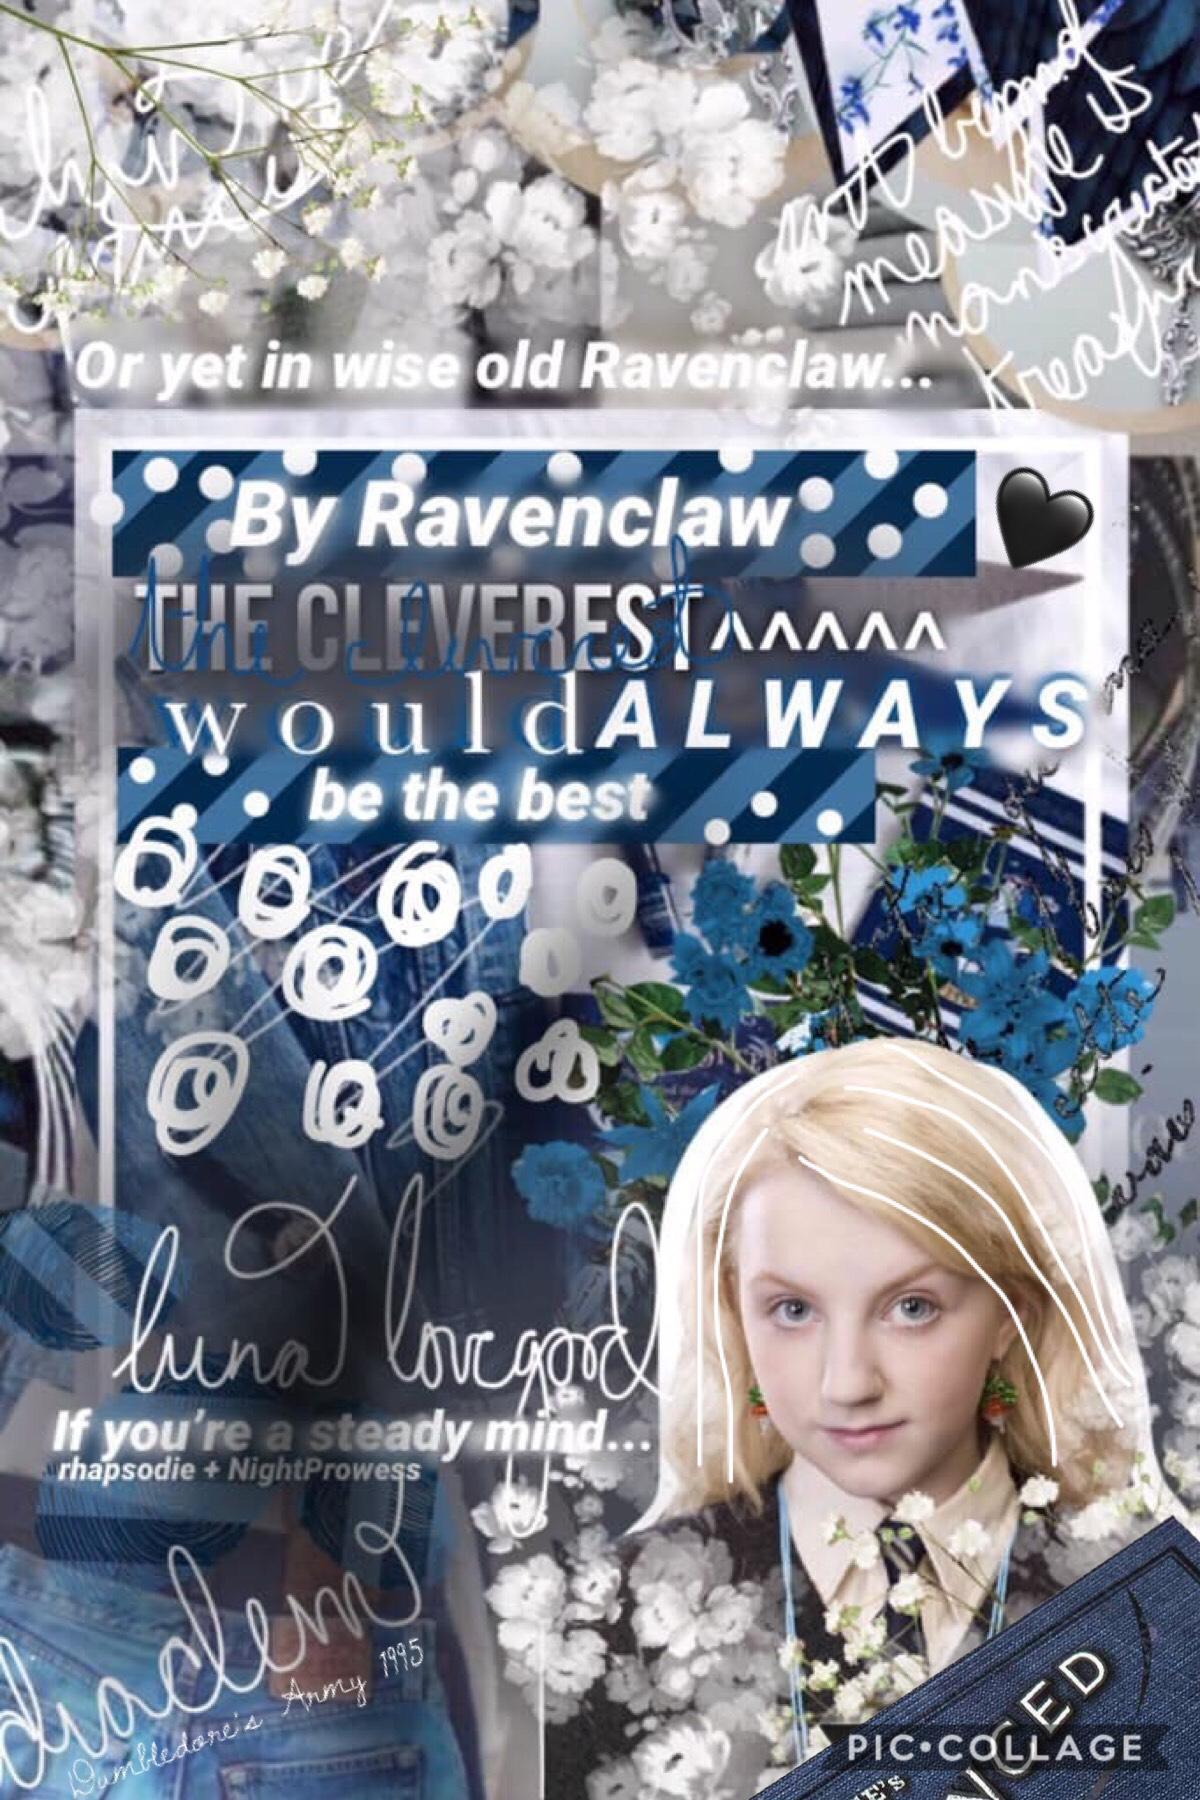 ⚡️💙•Tap•💙⚡️
It’s been like two weeks since I last posted oof😂 ✨🖤• COLLAB WITH THE AMAZING RHAPSODIE•🖤✨ Fun Fact: I used to be a Ravenclaw, but now I’ve definitely shifted towards Gryffindor or Slytherin. Happy Mother’s Day to all the mothers out there💜 🔥N